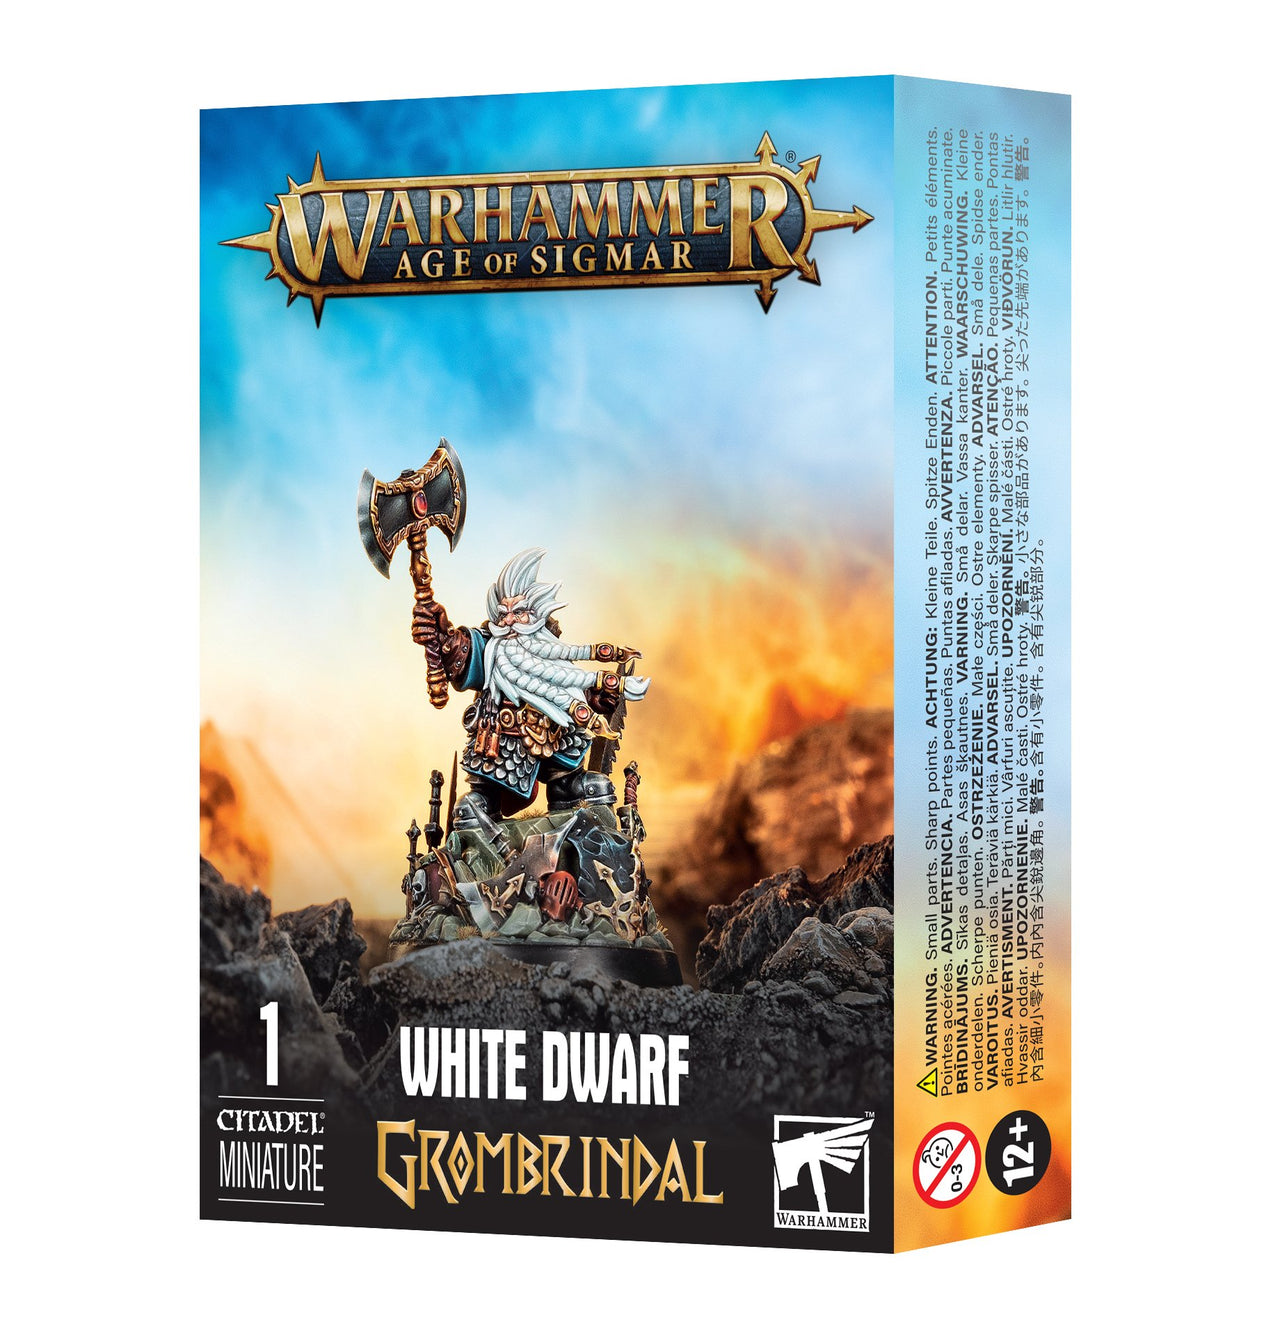 Grombrindal: The White Dwarf Miniature